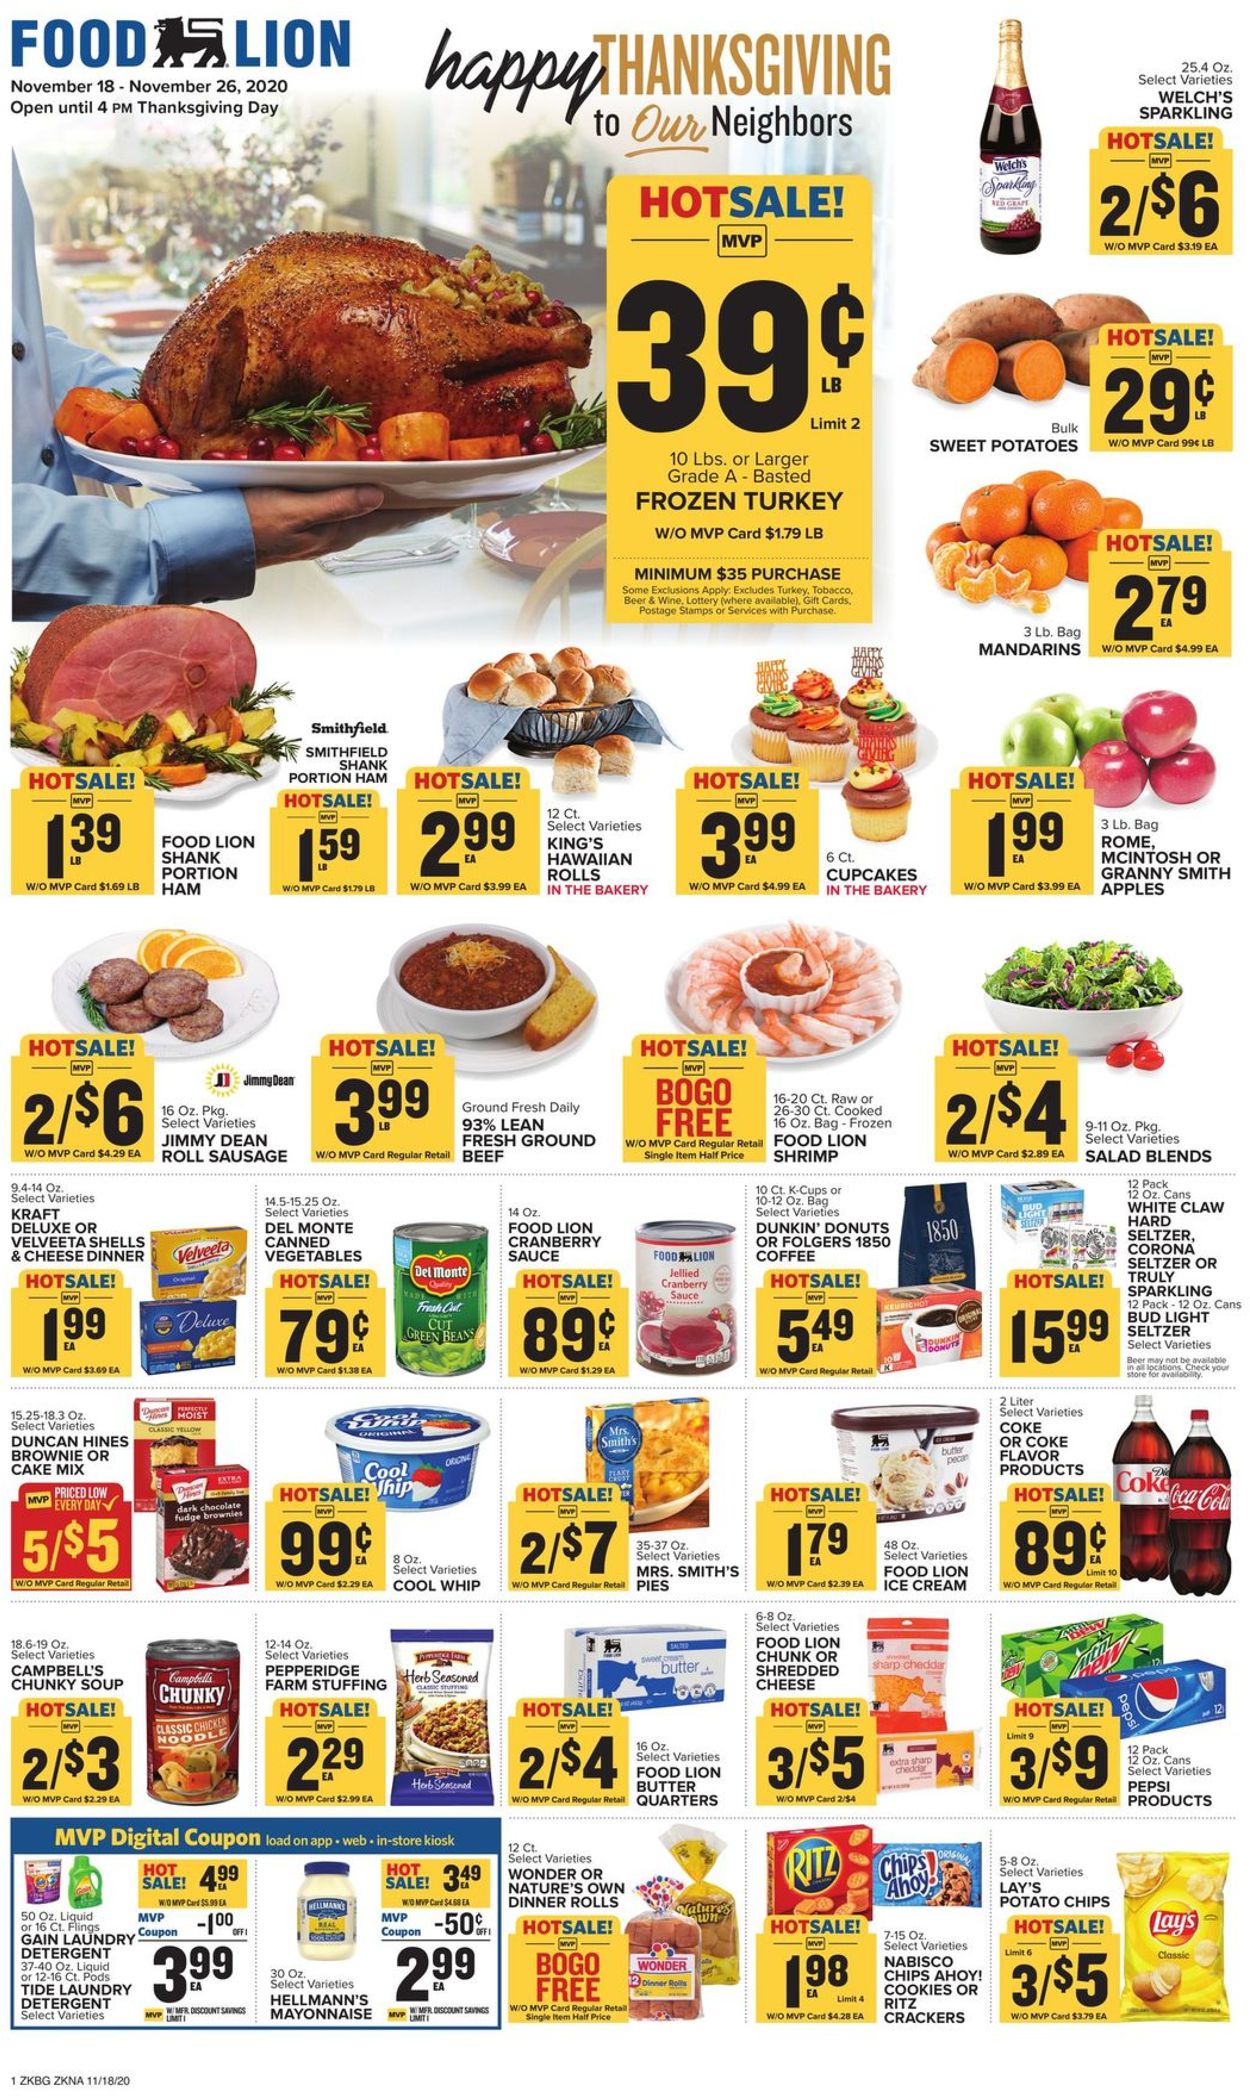 Food Lion Thanksgiving 2020 Current weekly ad 11/18 11/26/2020